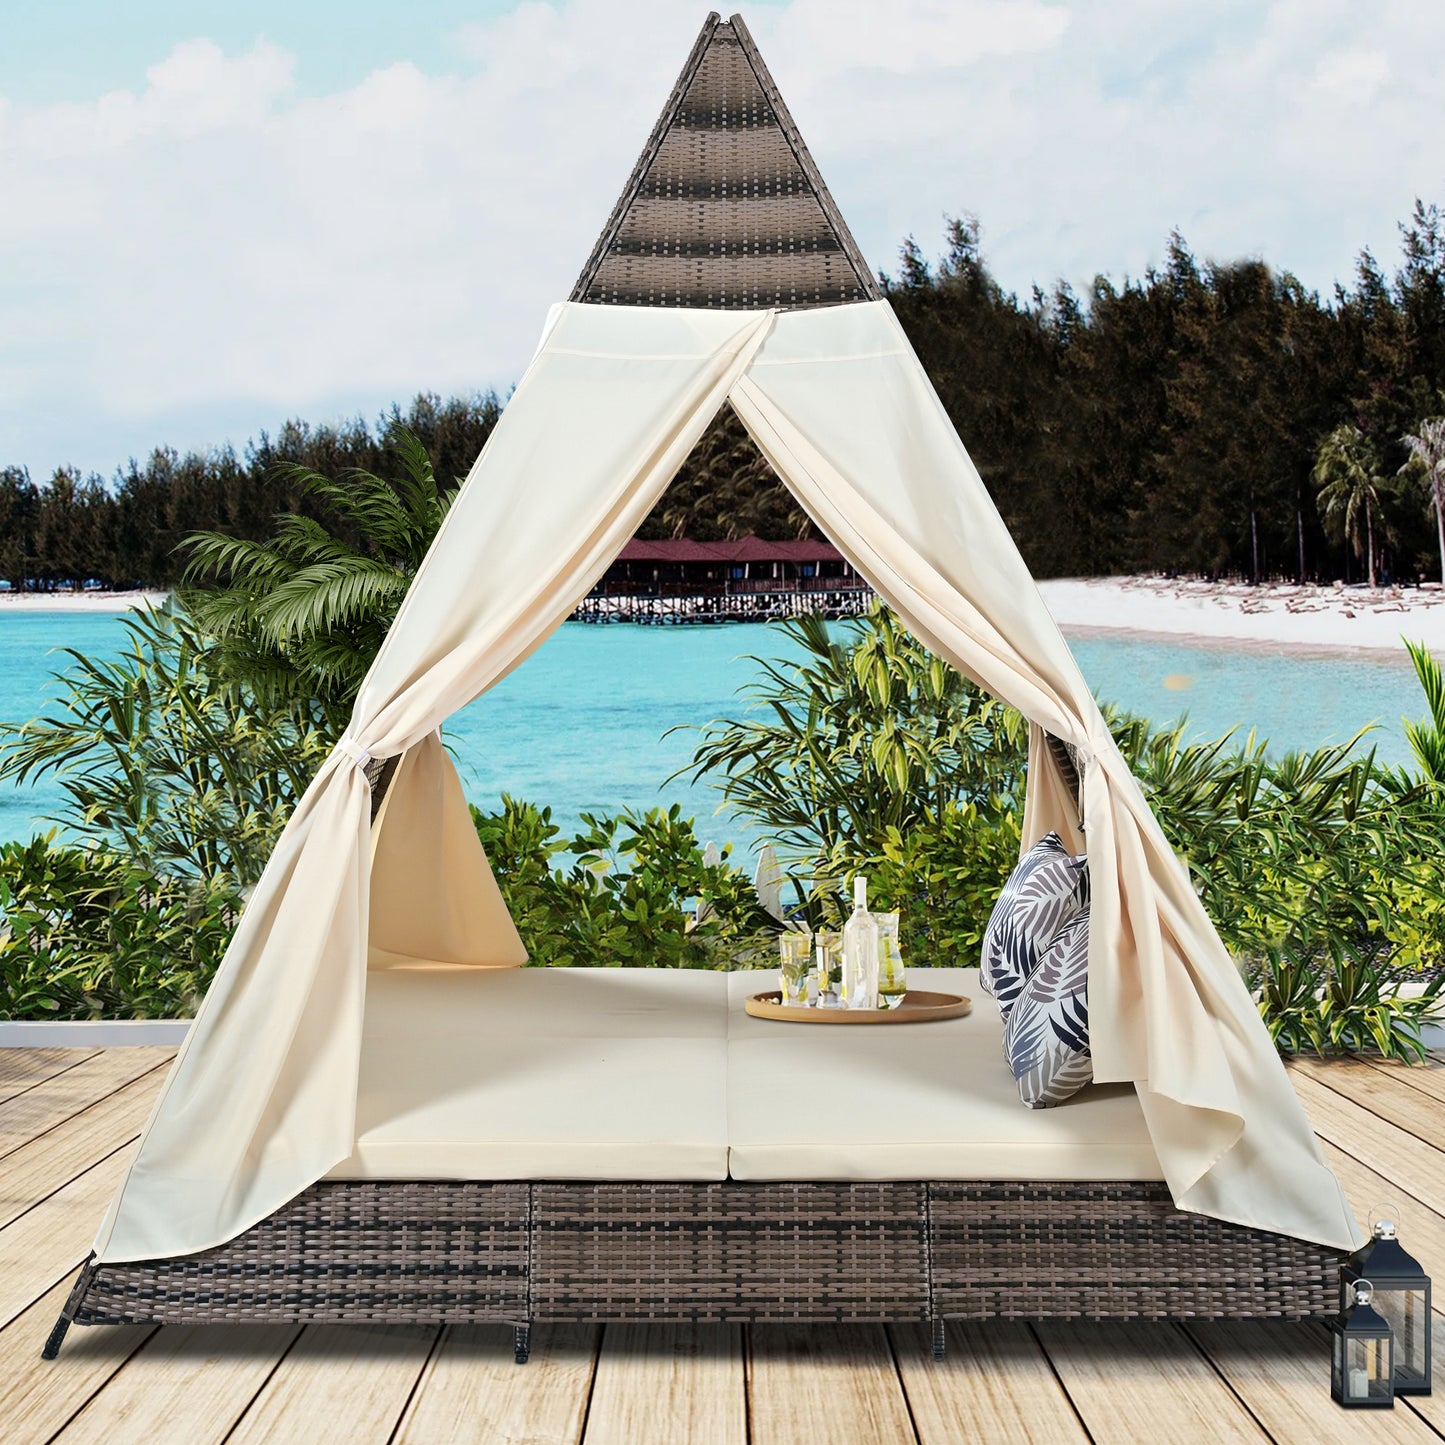 Syngar Outdoor Patio Sunbed with Removable Curtain, All Weather PE Wicker Tent-Shaped Daybed with Beige Cushions and Colorful Pillows, Patio Furniture Set for Garden Porch Deck Poolside